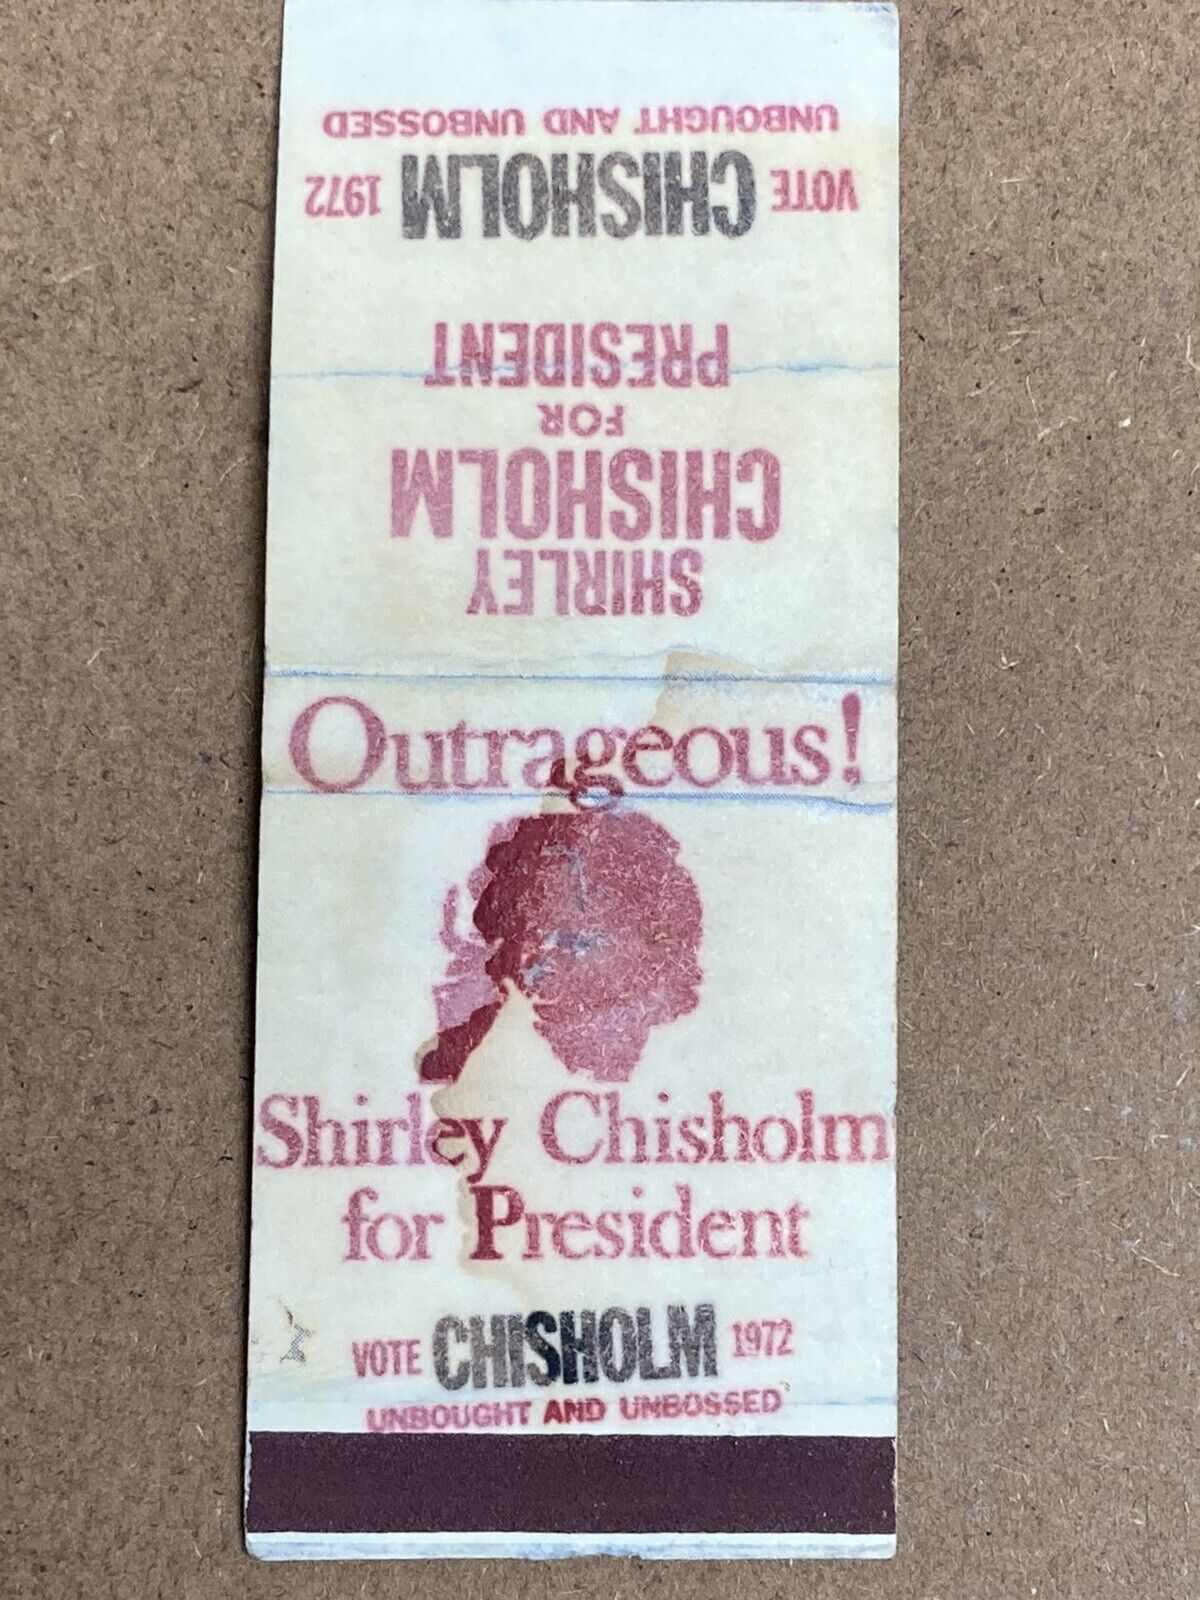 Shirley Chisholm For President '72 Unbought/Unbossed Matchbook Cover (Inside AD)